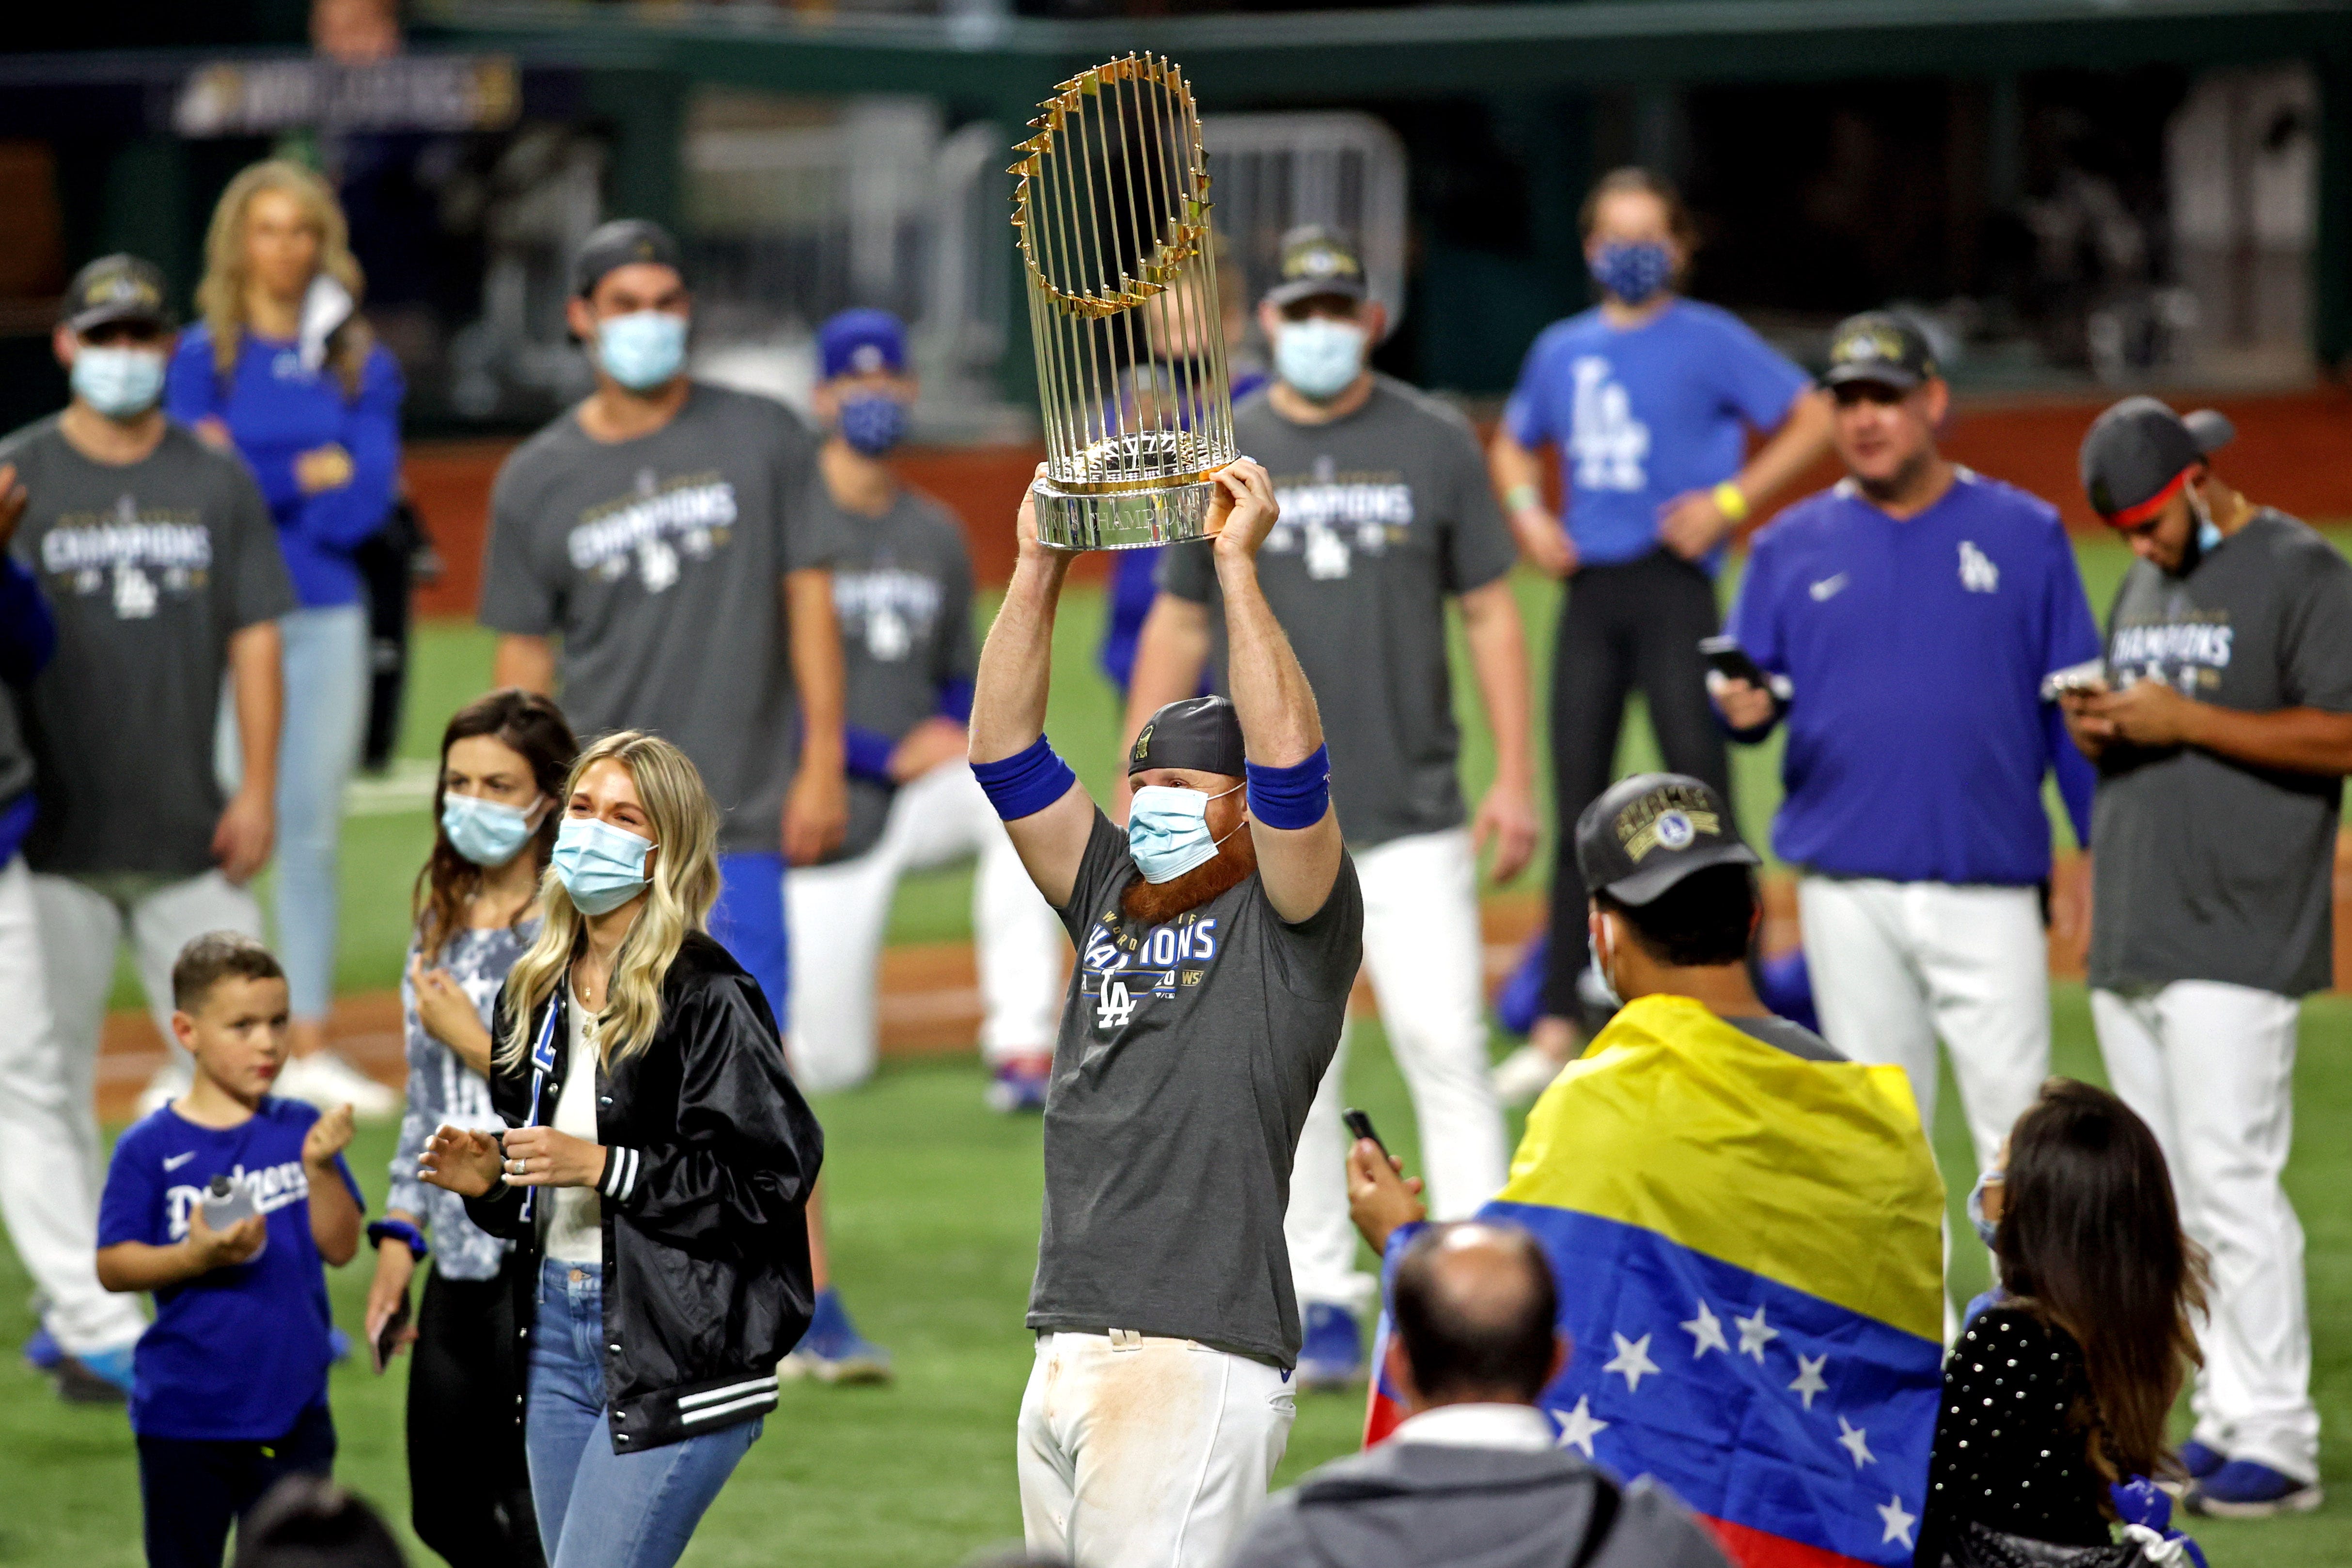 Justin Turner's positive coronavirus test and World Series Game 6: Here's what we know